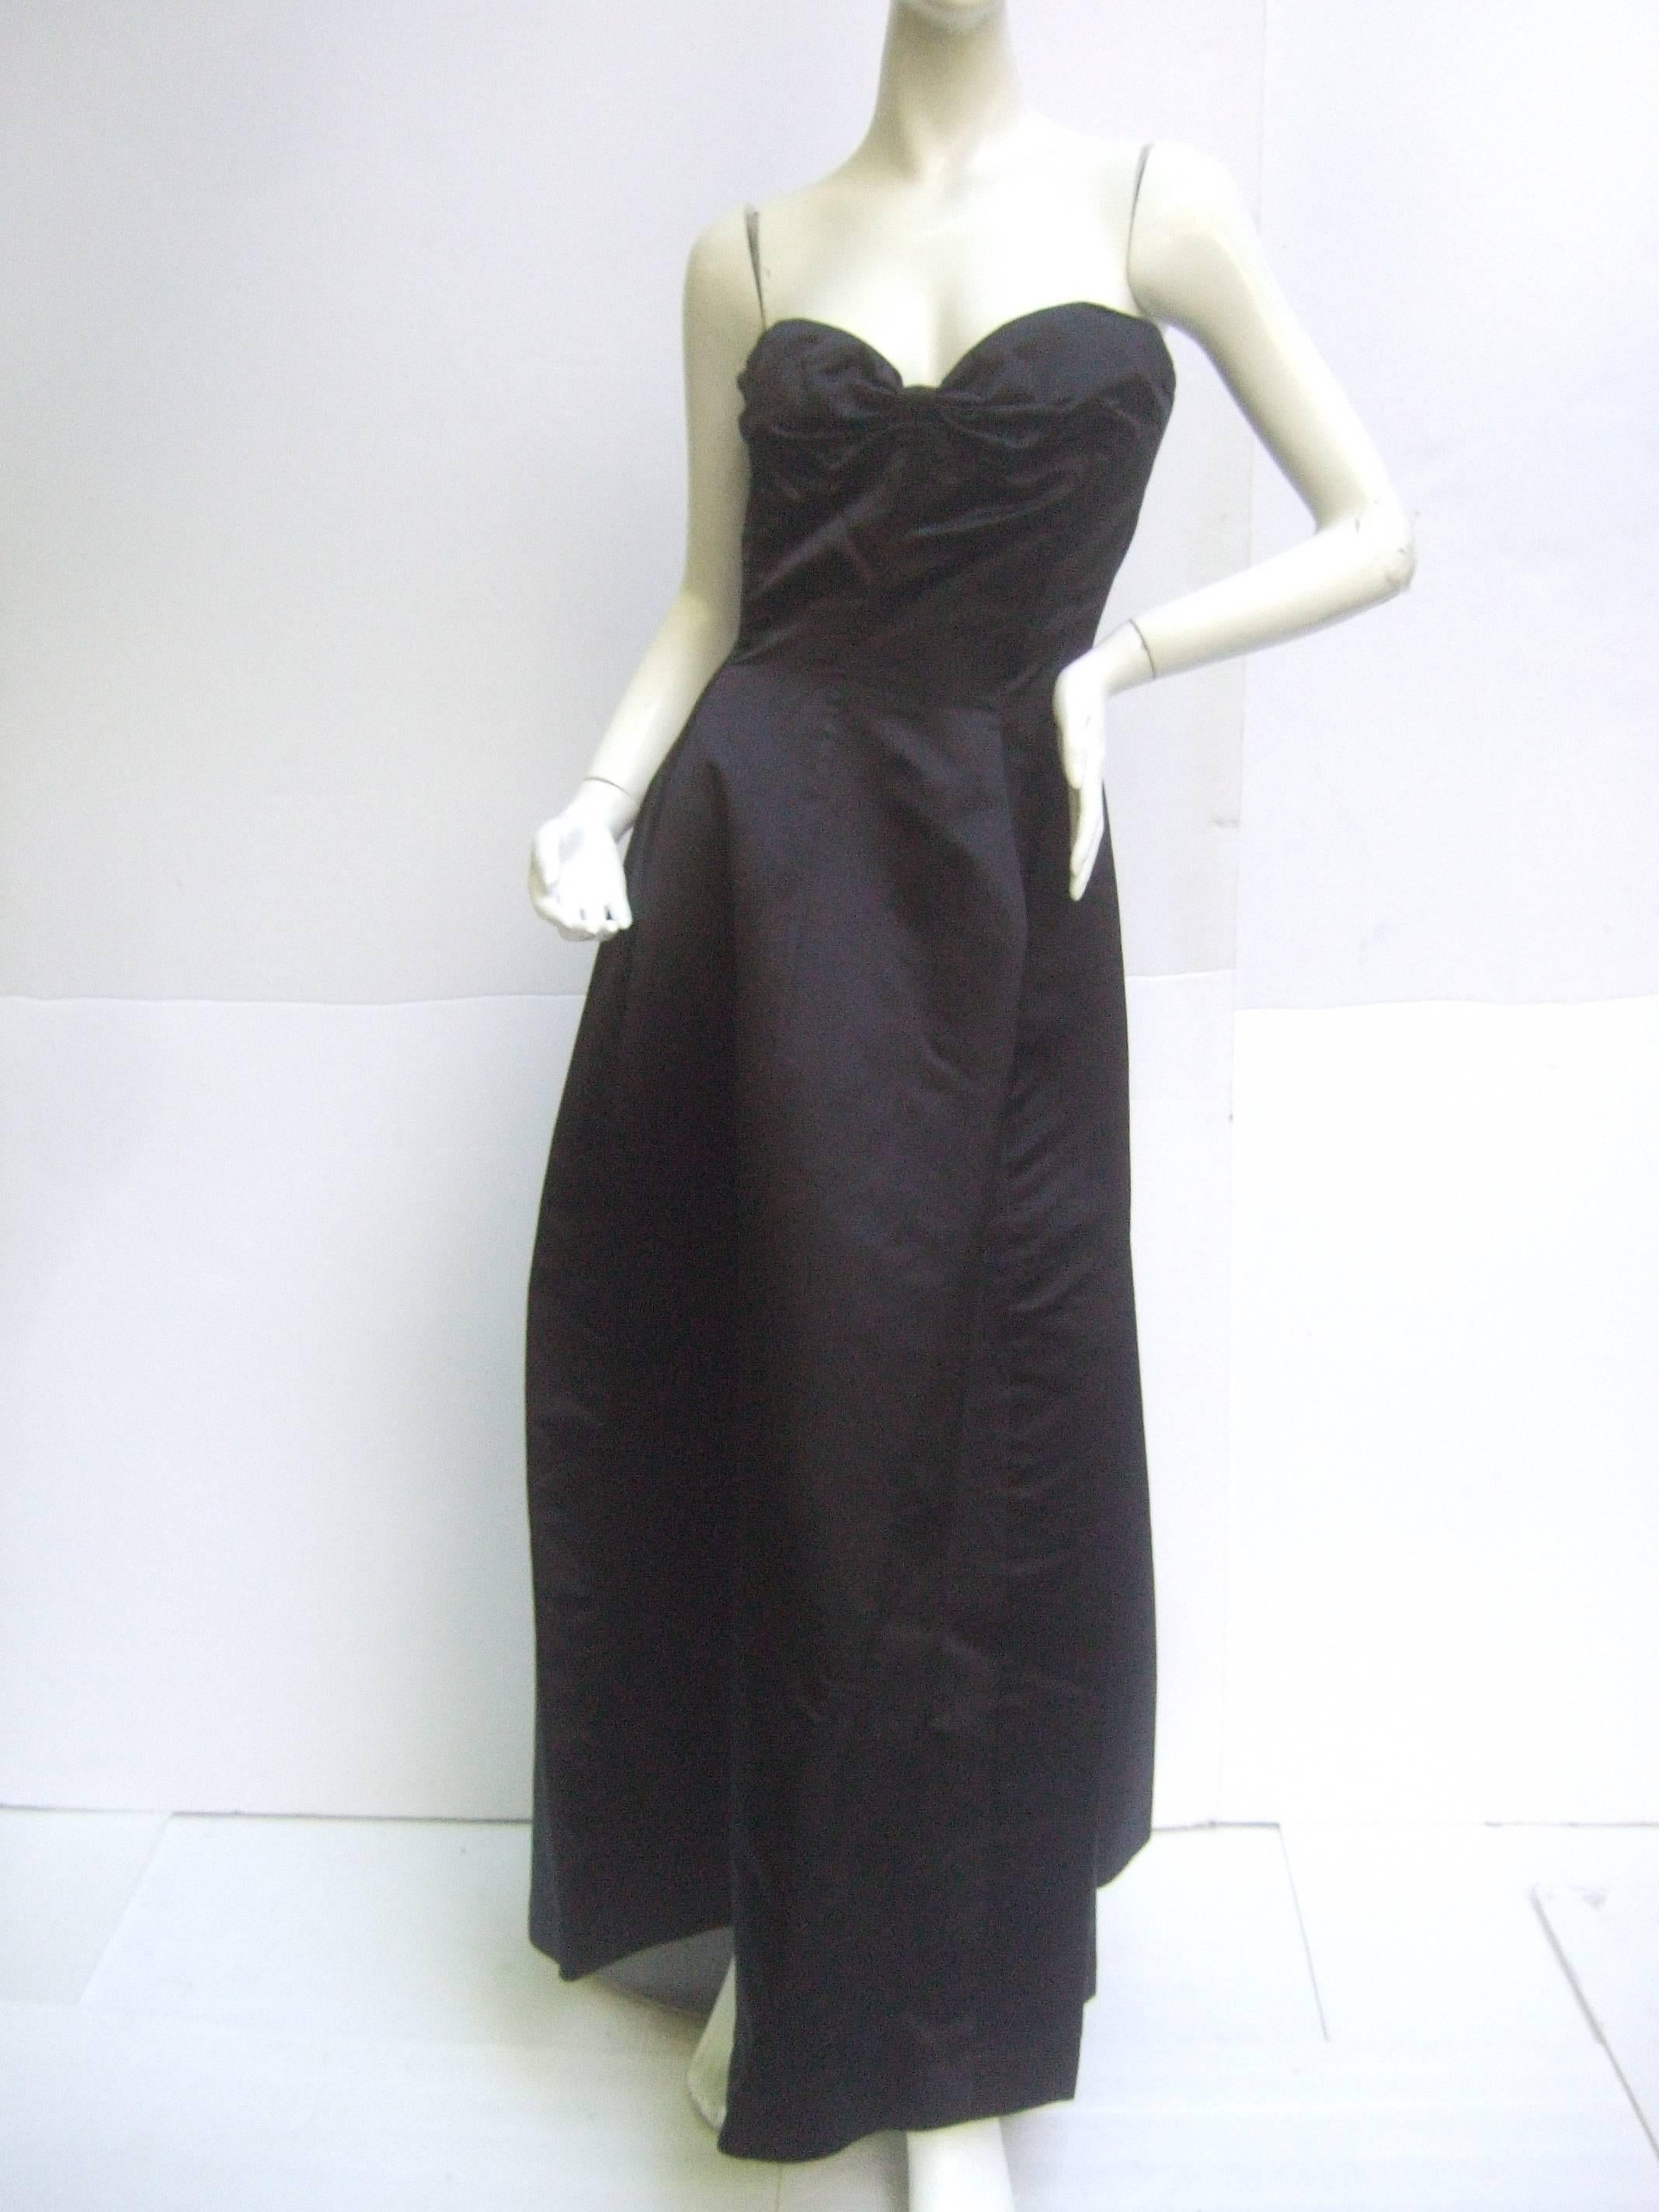 Christian Dior Demi-Couture strapless gown with fully  boned bodice made of heavy black silk. Gorgeous bow back. So simple and elegant! 
Measurements:  Bust: 33.5"   Waist: 27" Length: 51"
Condition is excellent aside from 2 tiny